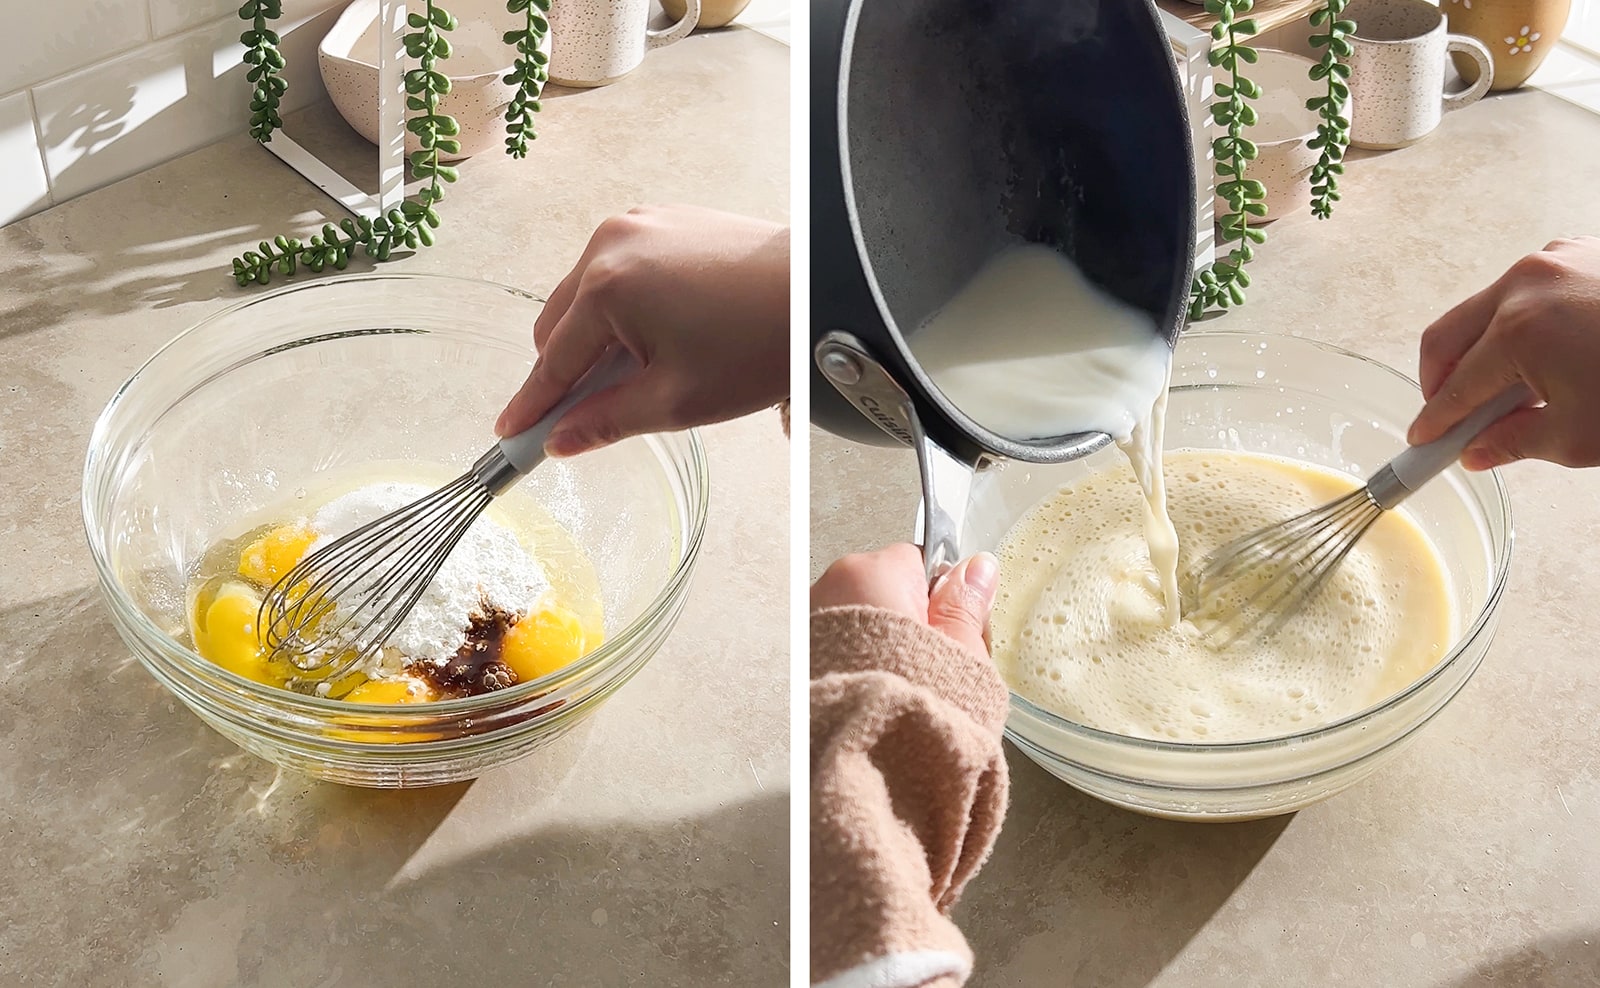 Left to right: whisking egg yolks and ingredients in bowl, pouring hot milk into egg yolk mixture while whisking.